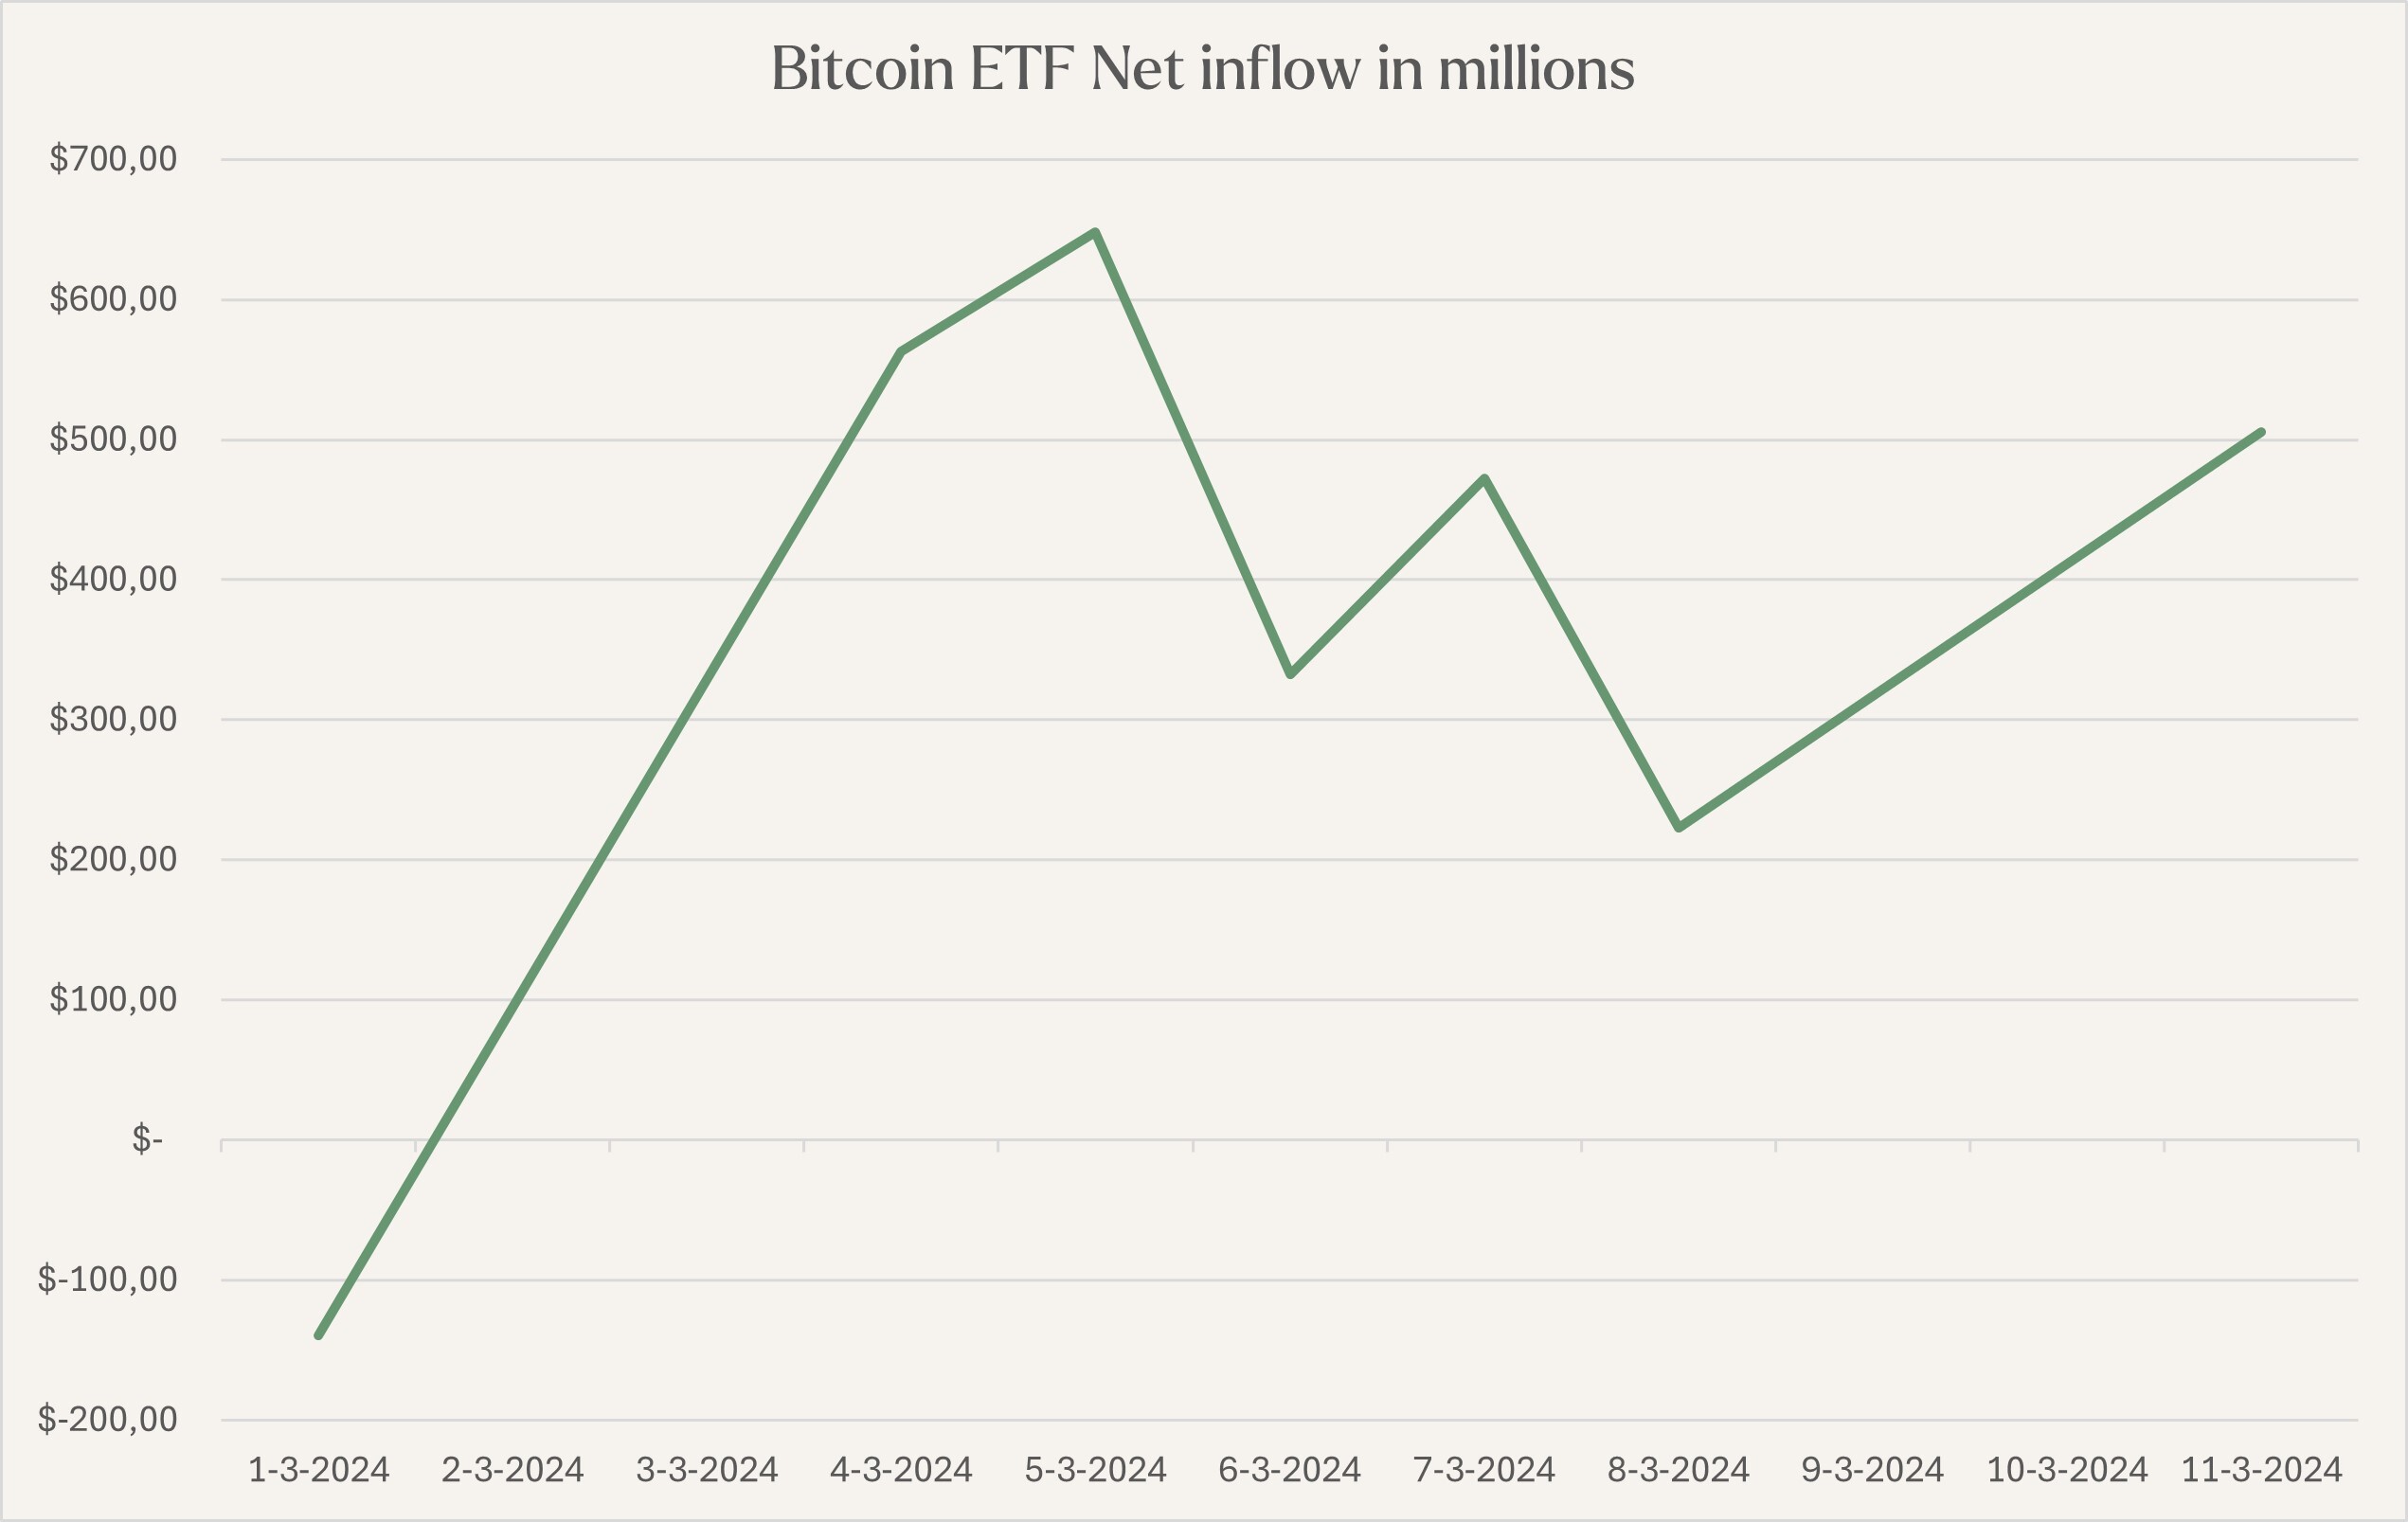 Bitcoin ETF net inflow during March